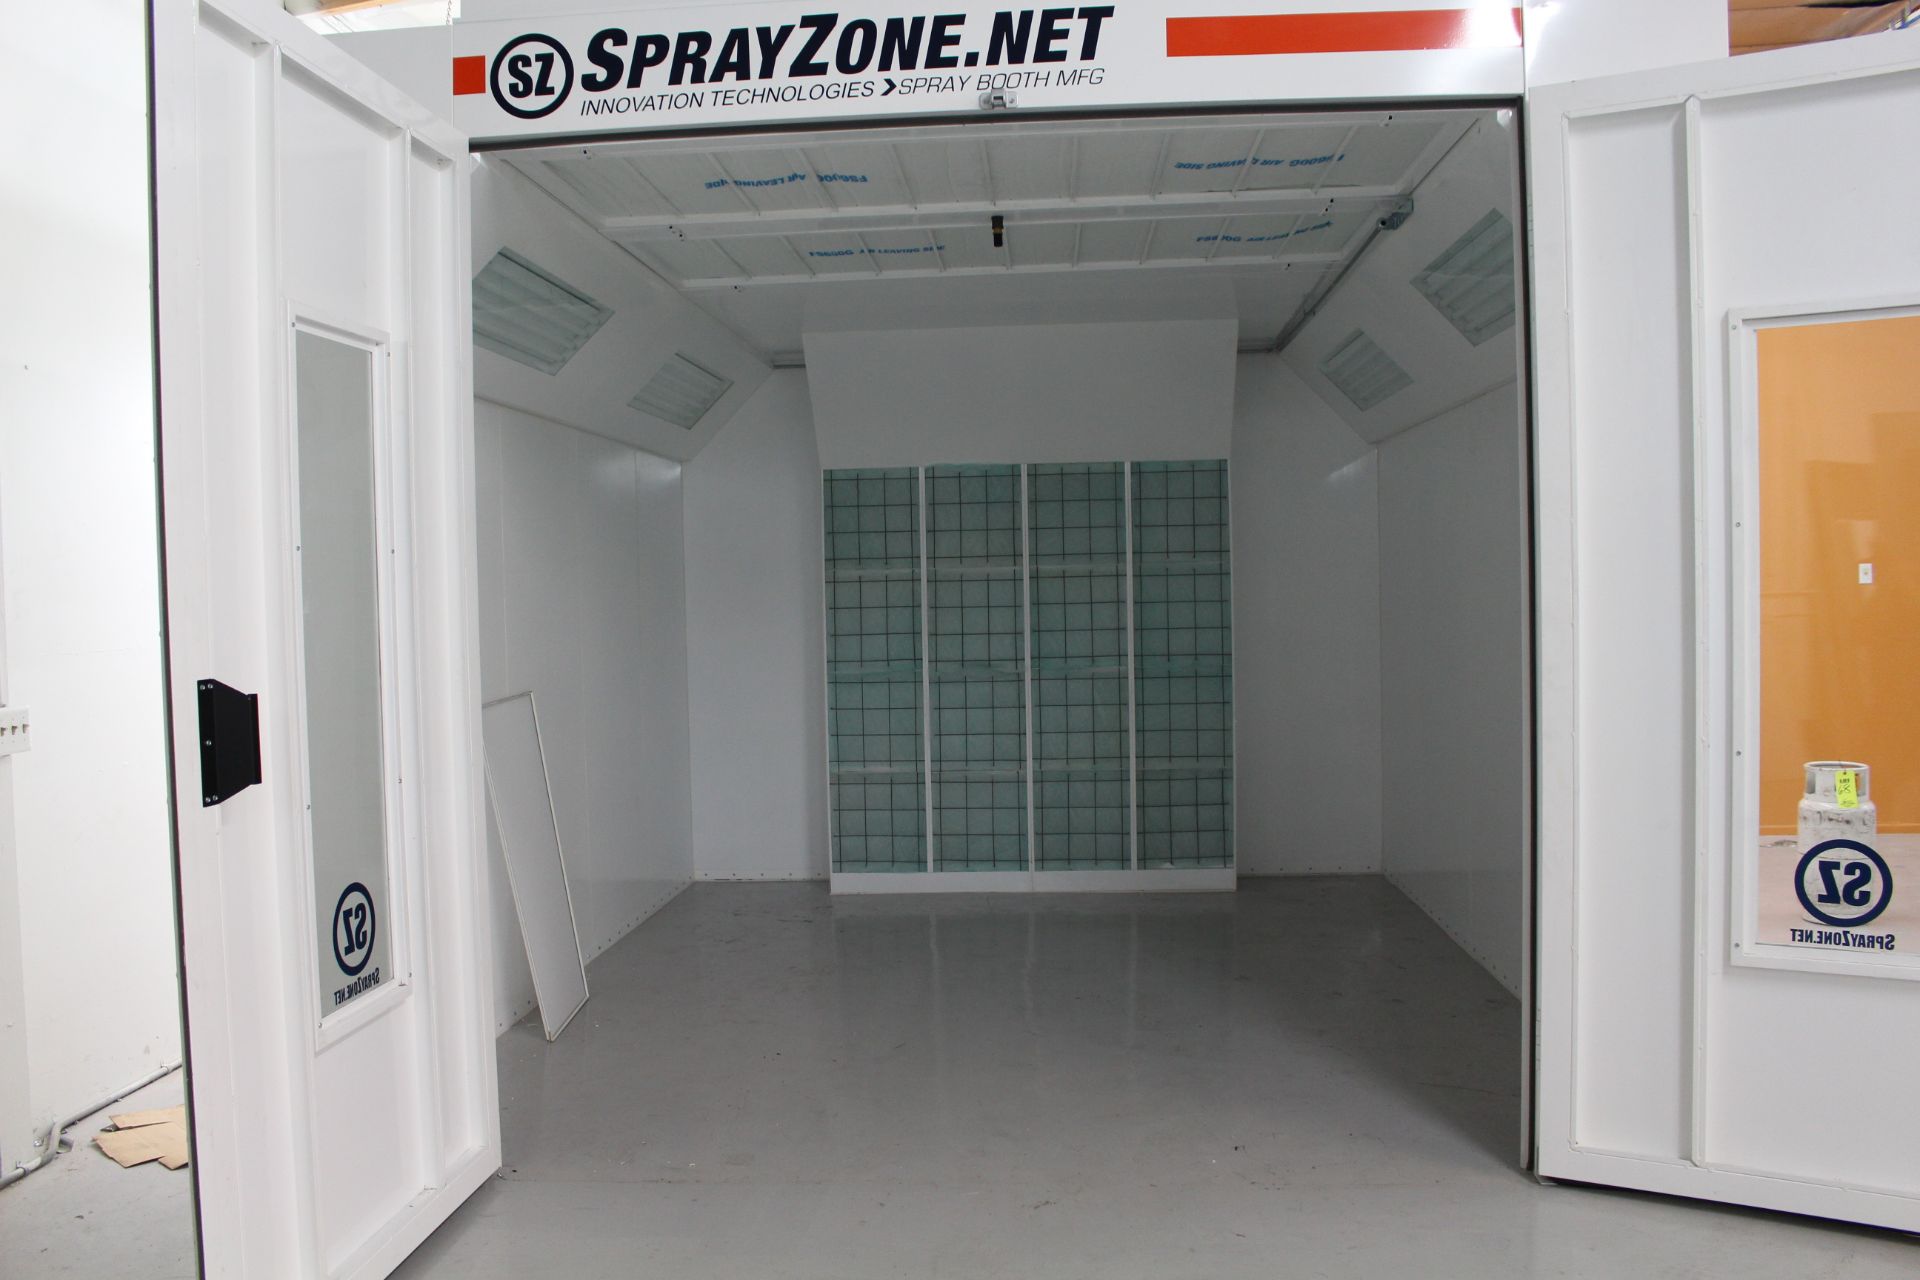 SPRAY ZONE PAINT SPRAY BOOTH, BRAND NEW, 169" LONG X 143" WIDE INSIDE DIMENSION - Image 5 of 15